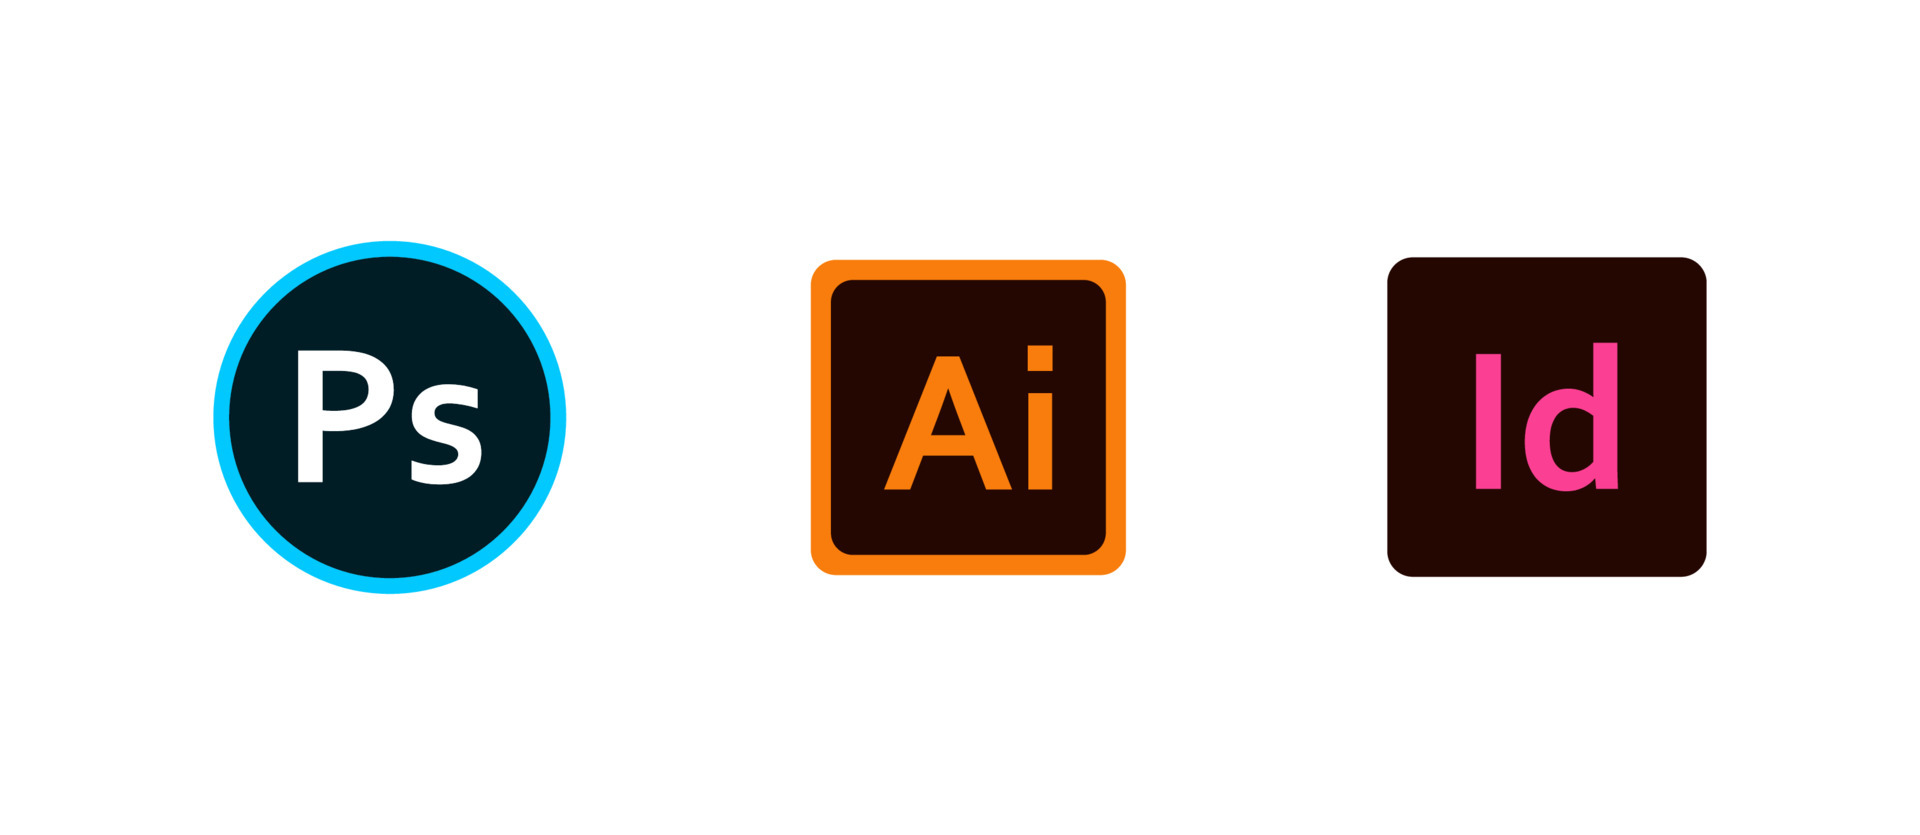 Adobe Illustrator Vector Art, Icons, And Graphics For Free Download